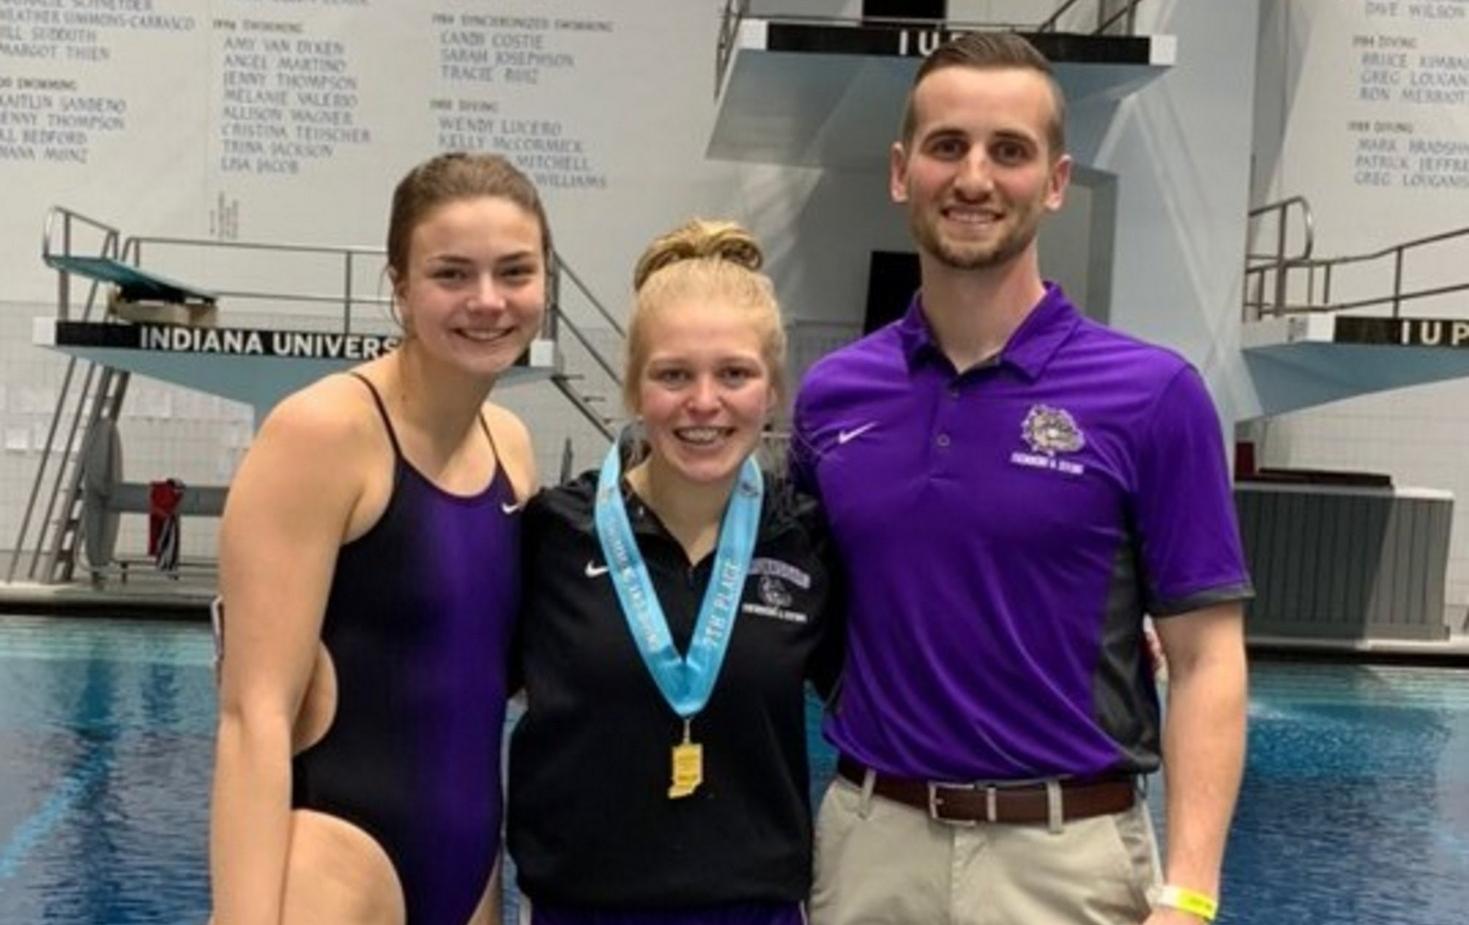 Wolf Places 7th, Leman places 16th at IHSAA State Diving Championships